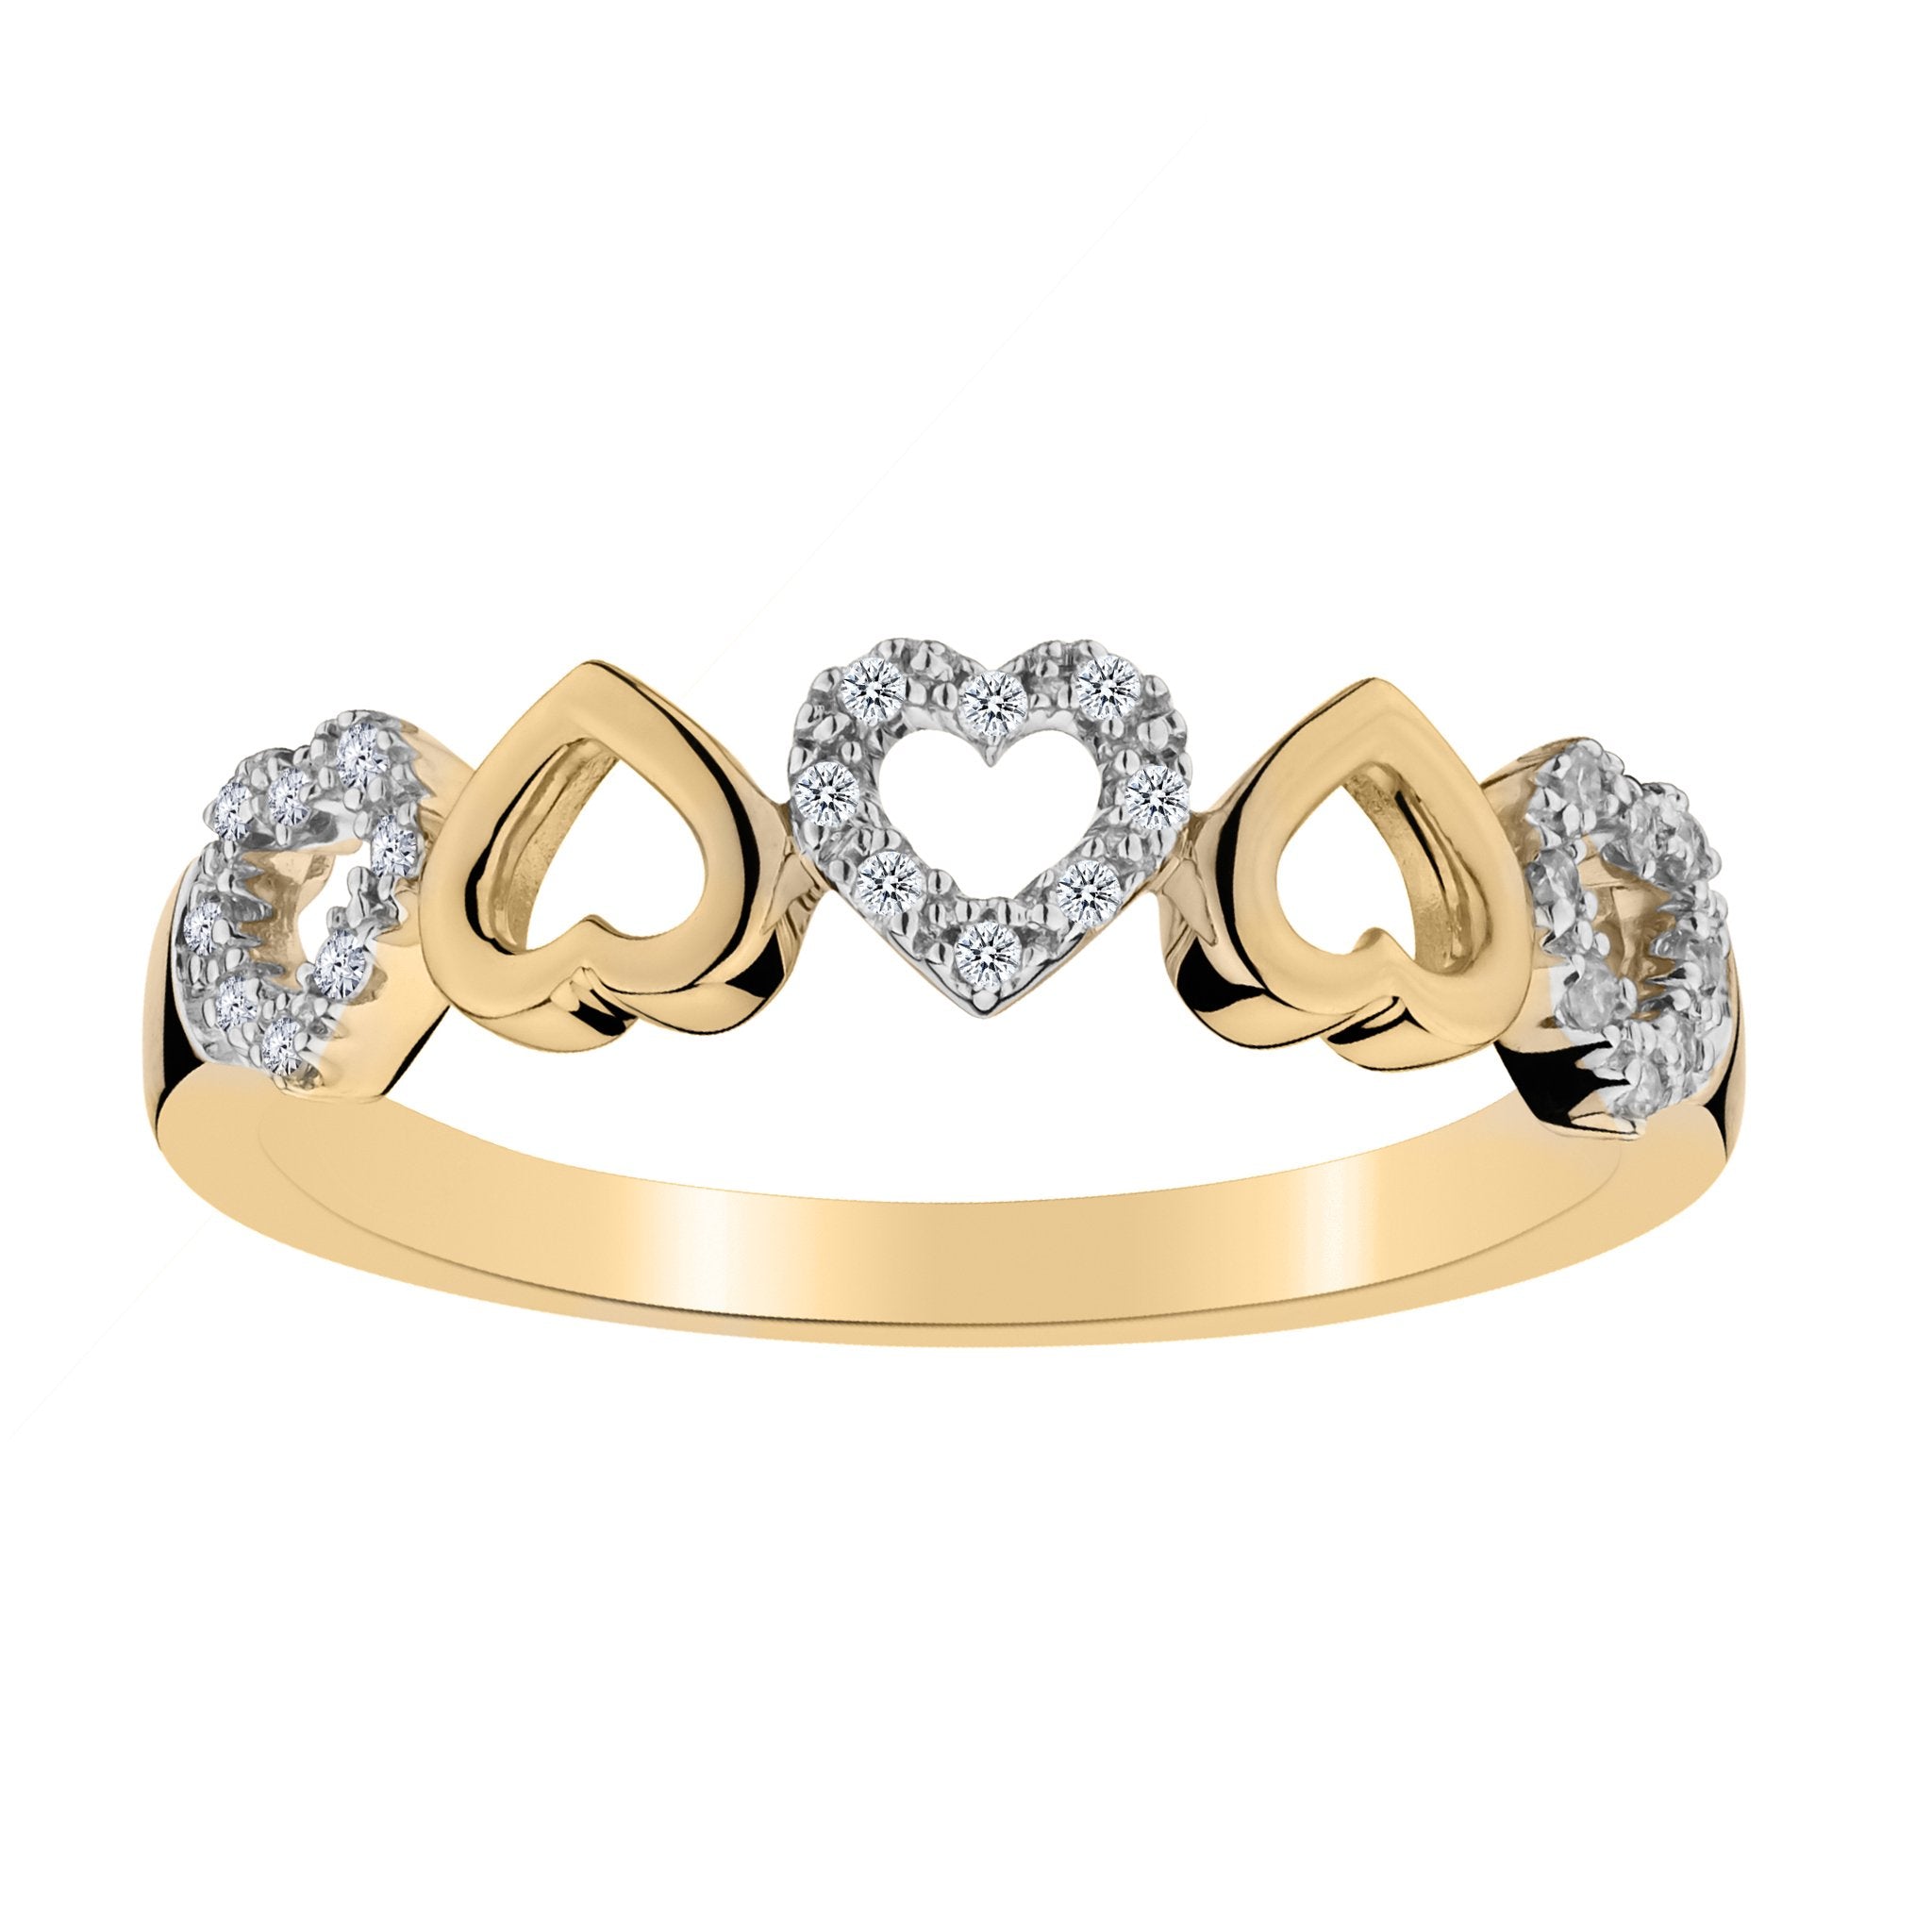 .10 CARAT DIAMOND HEART RING BAND, 10kt YELLOW GOLD. Fashion Rings - Griffin Jewellery Designs